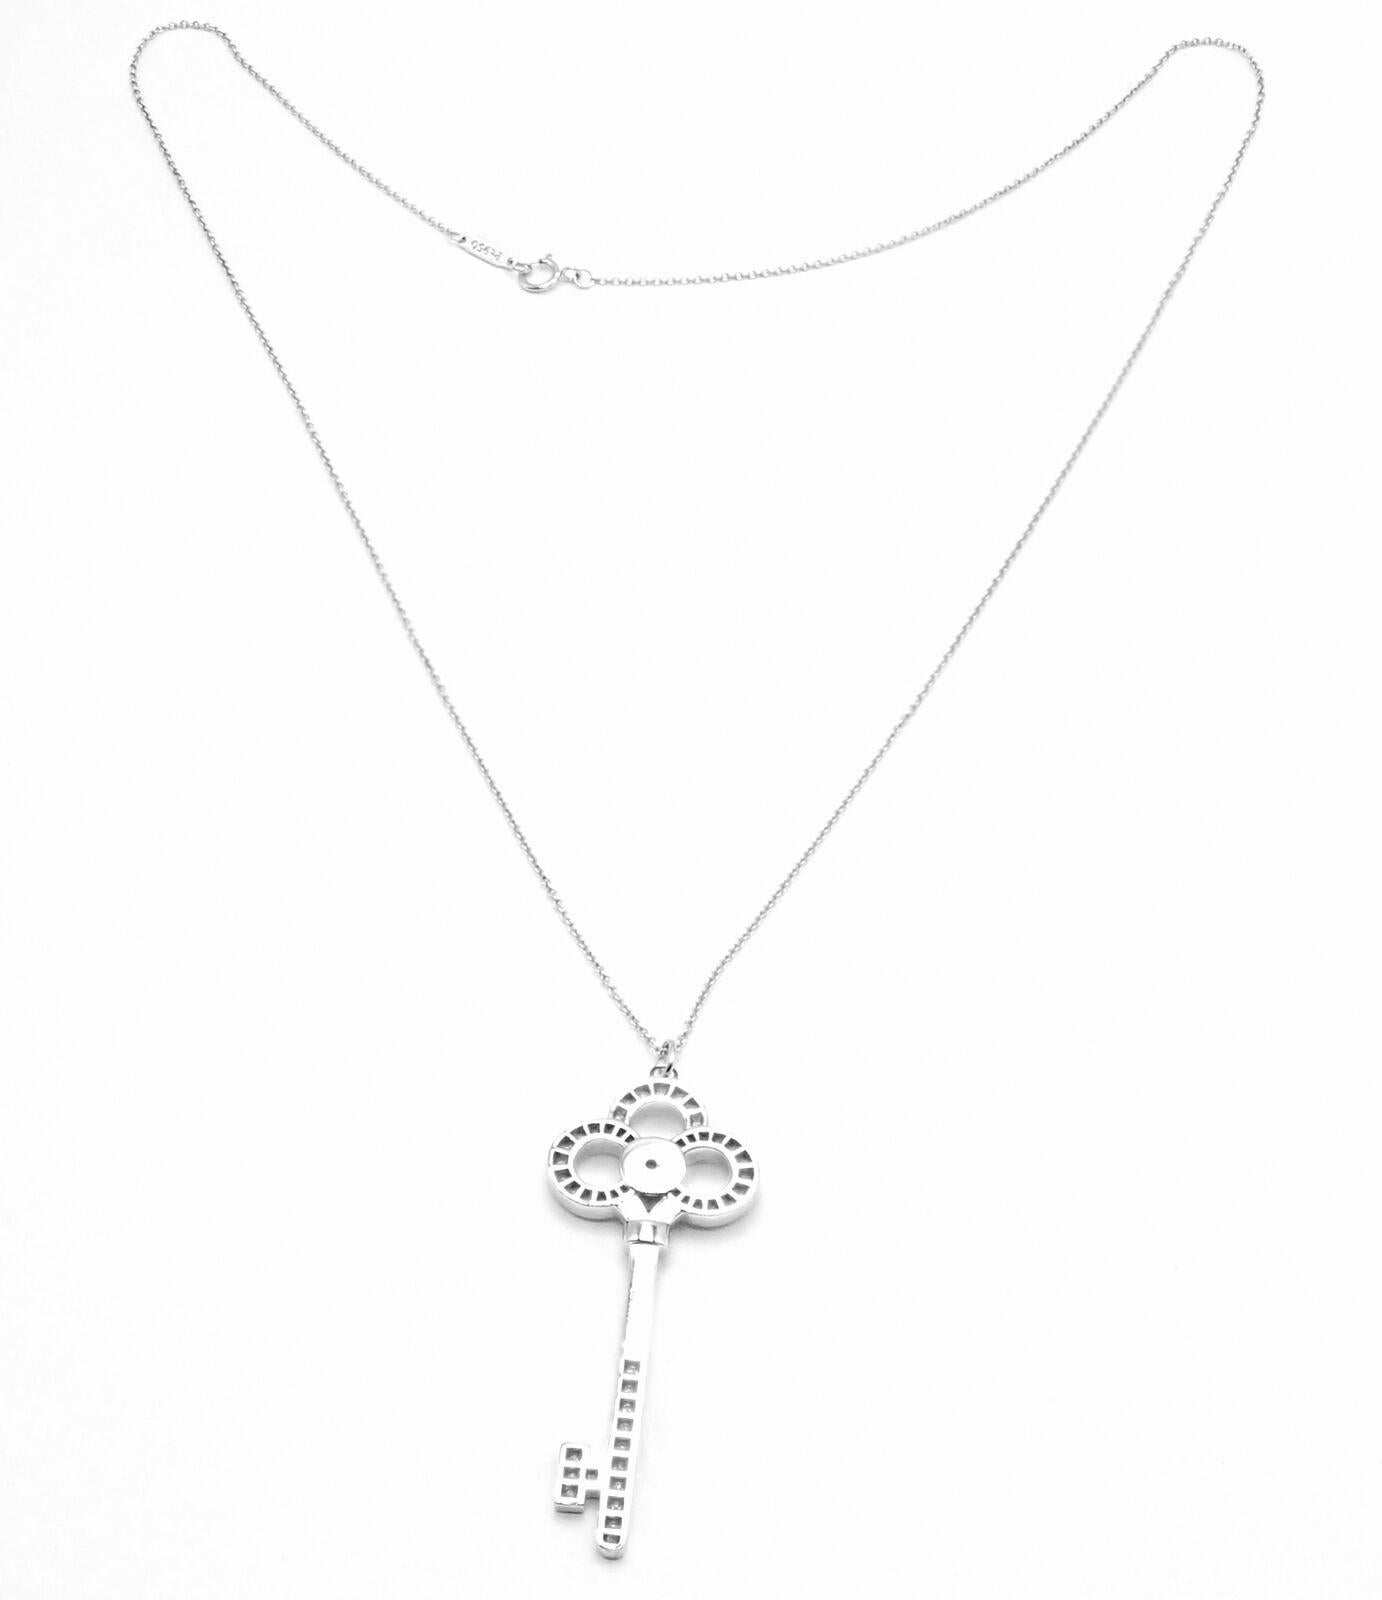 Platinum Diamond Crown Key Large Pendant Necklace by Tiffany & Co.
With 62 Round brilliant cut white diamonds total weigh approximately .64ct
Details:
Weight: 12.2 grams
Length: 20